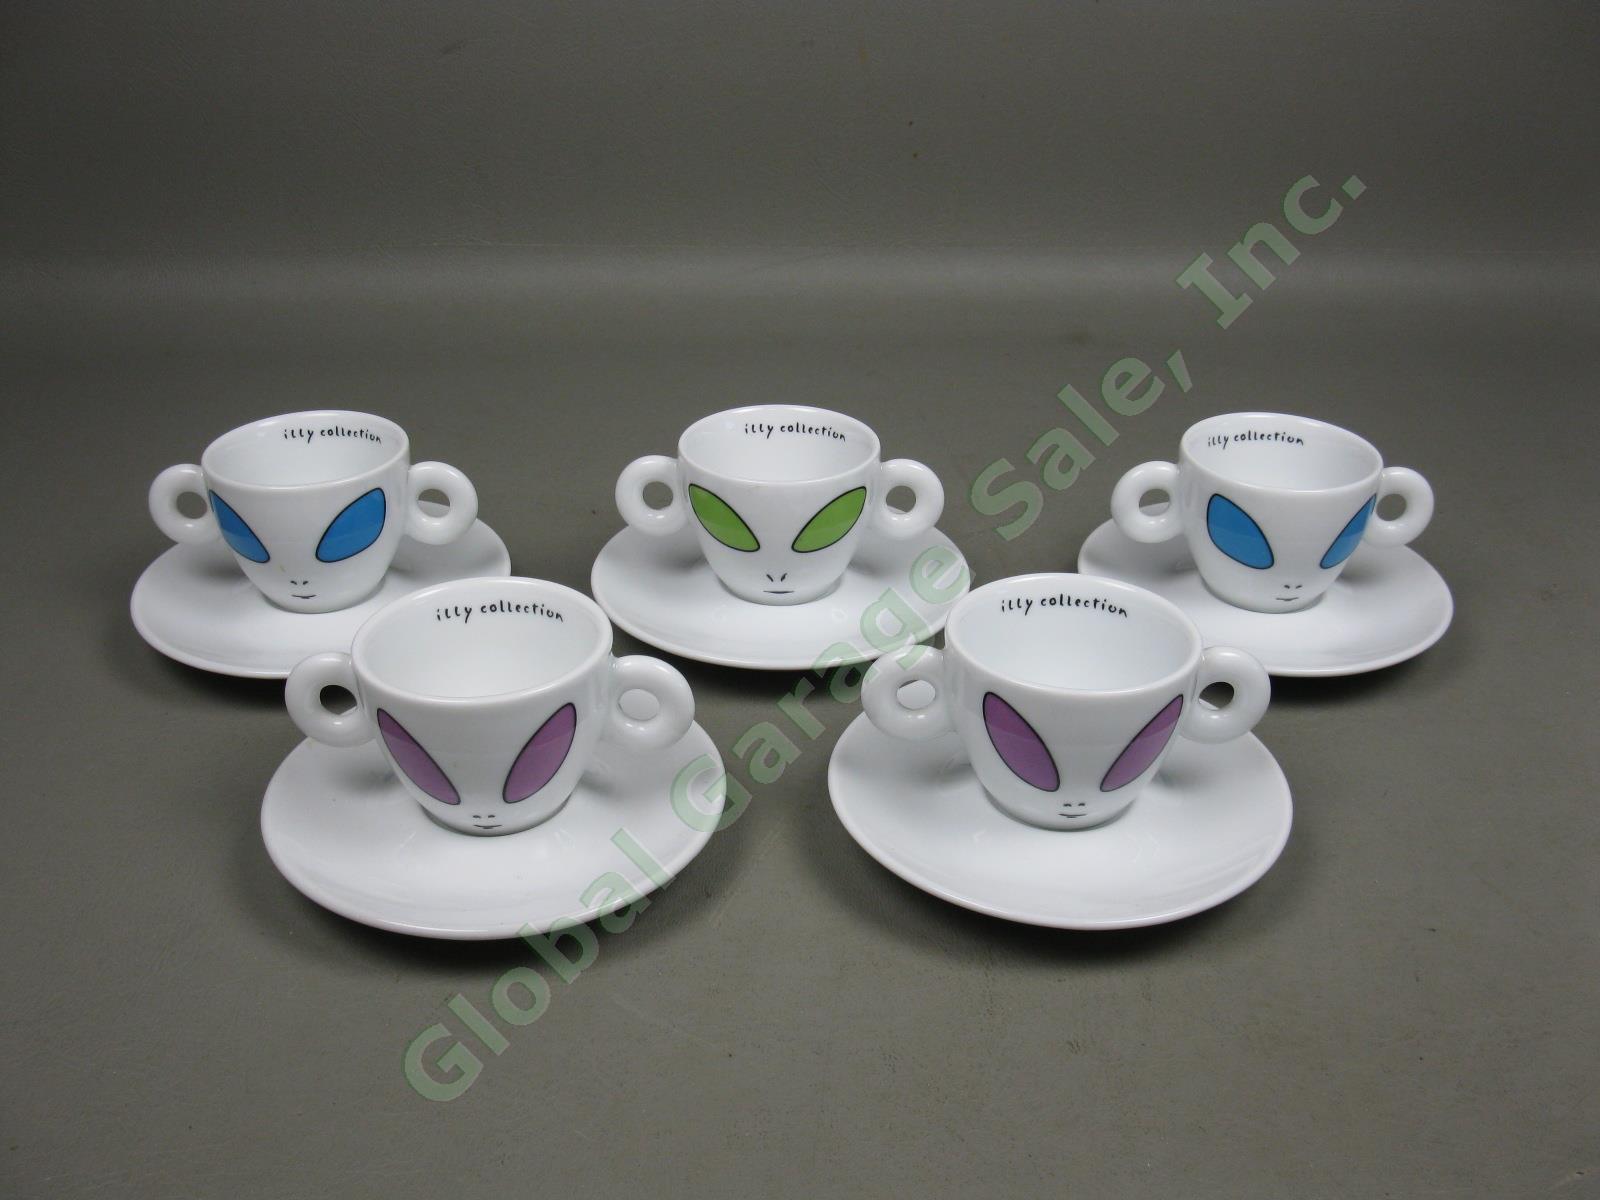 5 Illy Collection David Byrne Alien Espresso Coffee Cups + Saucers Set Lot 2001